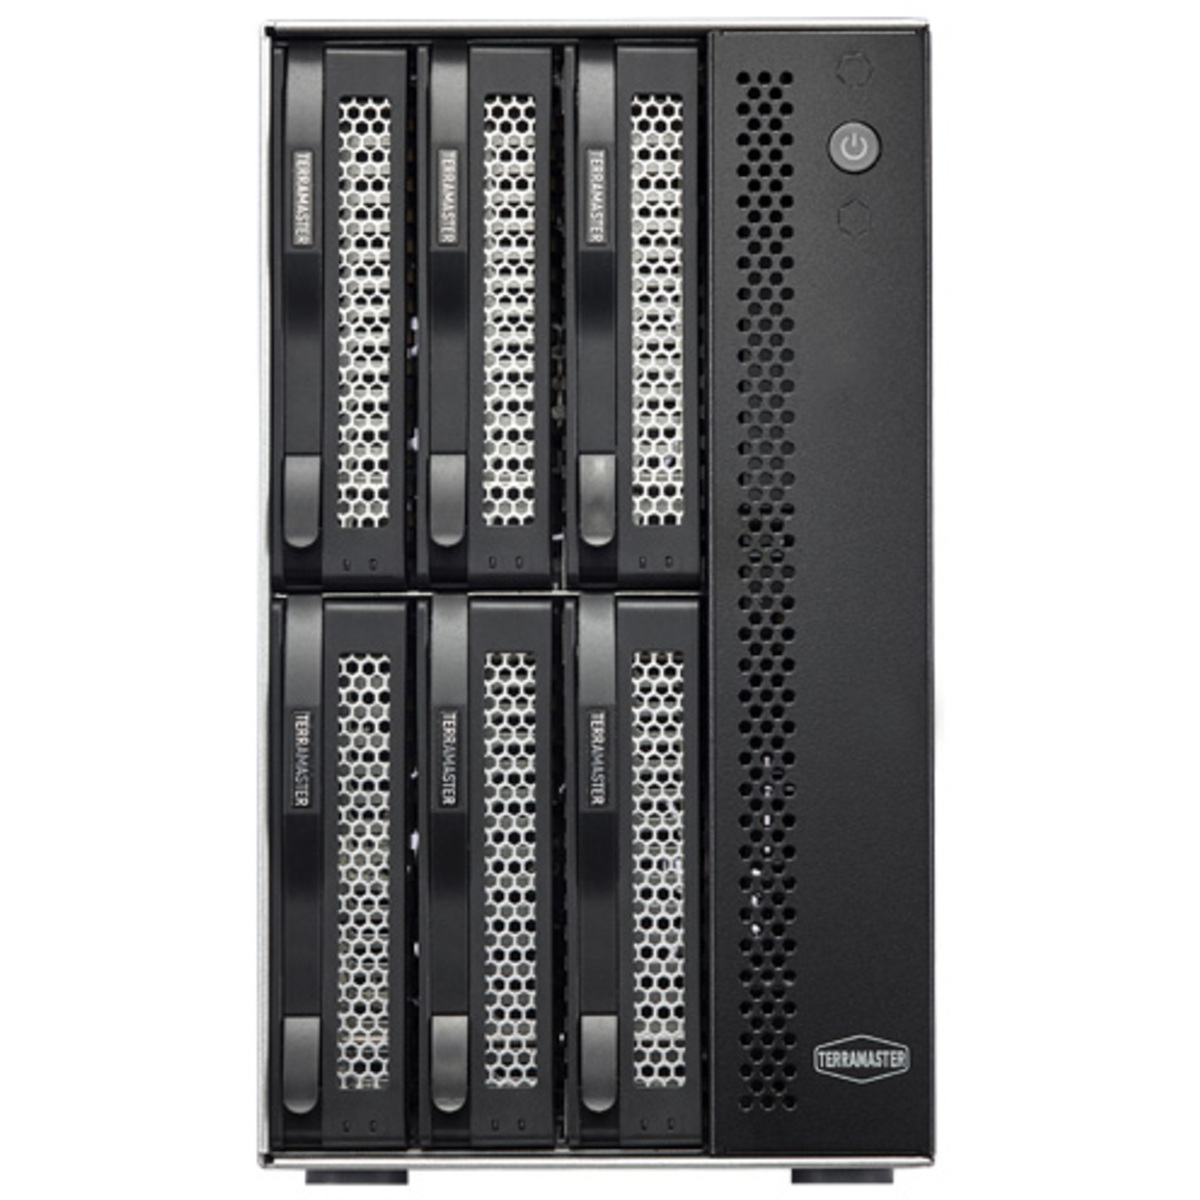 TerraMaster T6-423 NAS - Network Attached Storage Device Burn-In Tested Configurations - FREE RAM UPGRADE